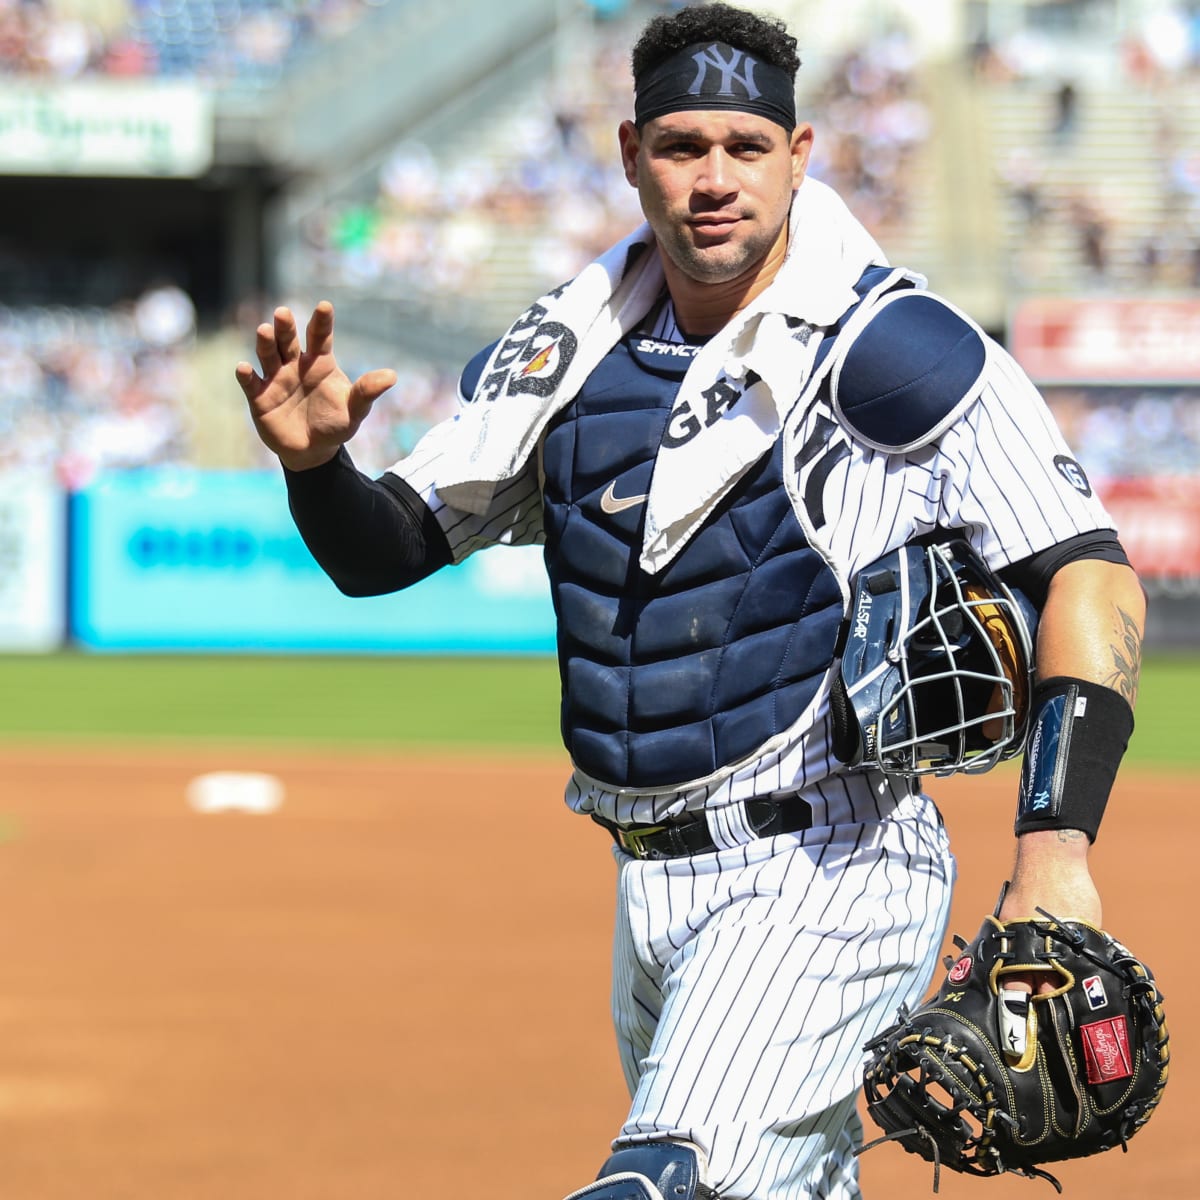 Gary Sanchez could be on move again after disappointing Twins season